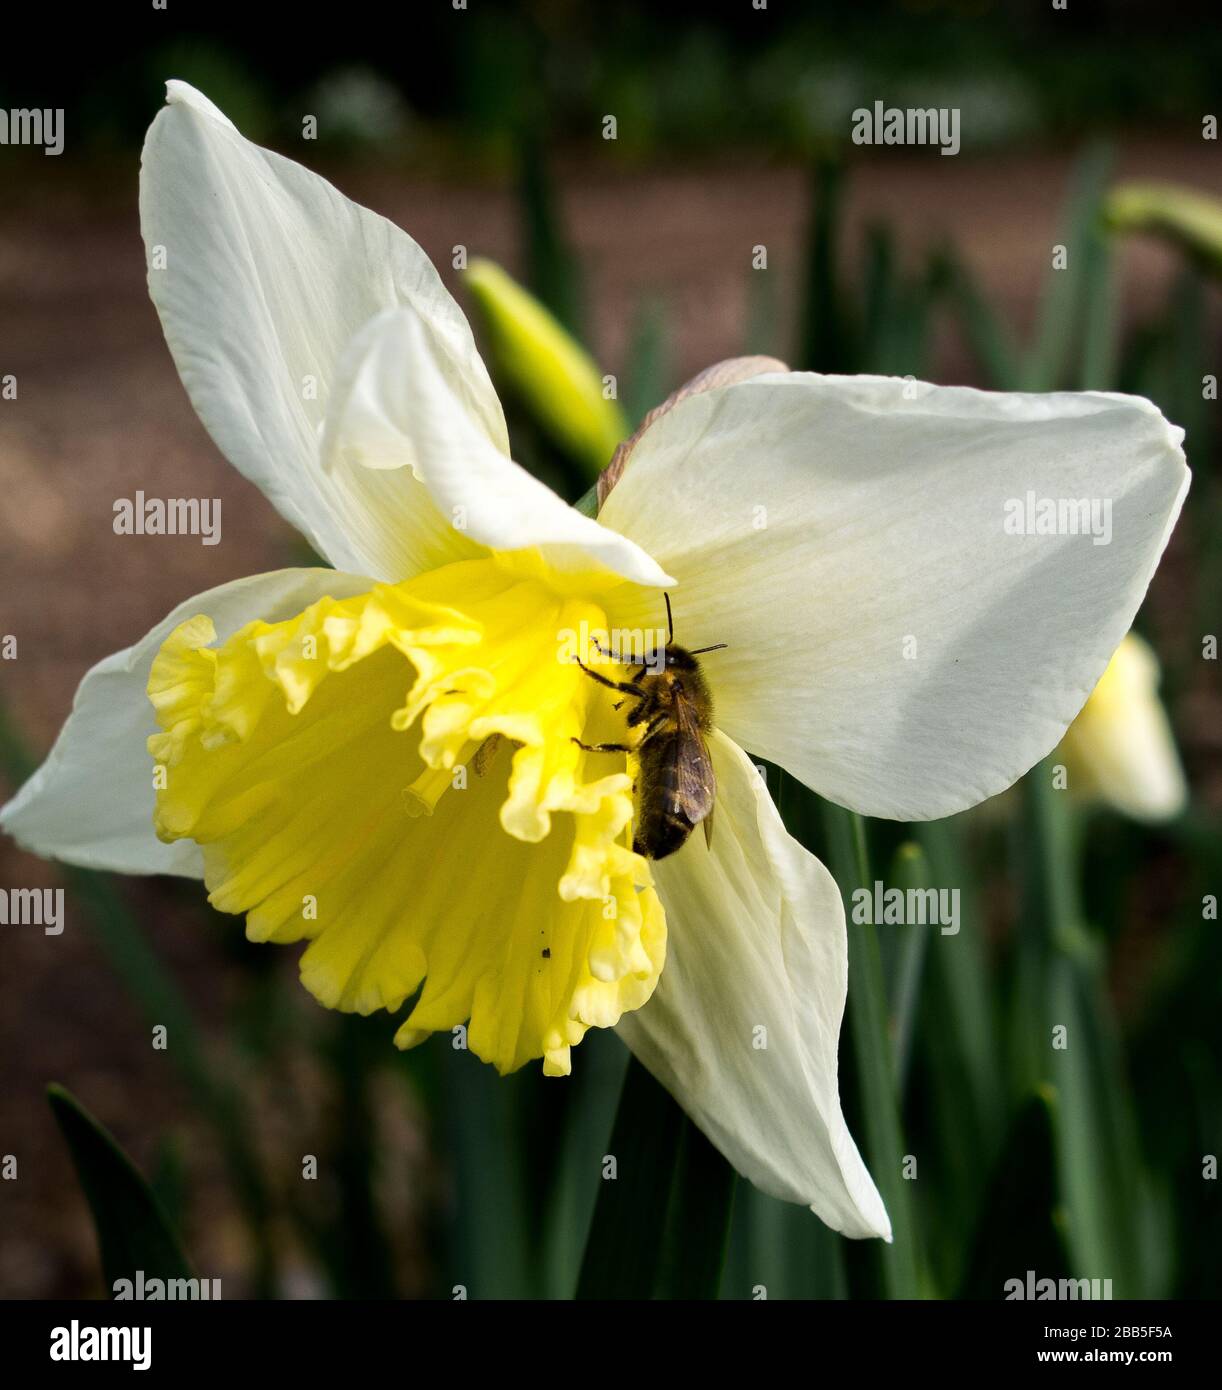 Single Bee on the trumpet of a Narcissus, Daffodil, flower in an Oxfordshire village garden Stock Photo